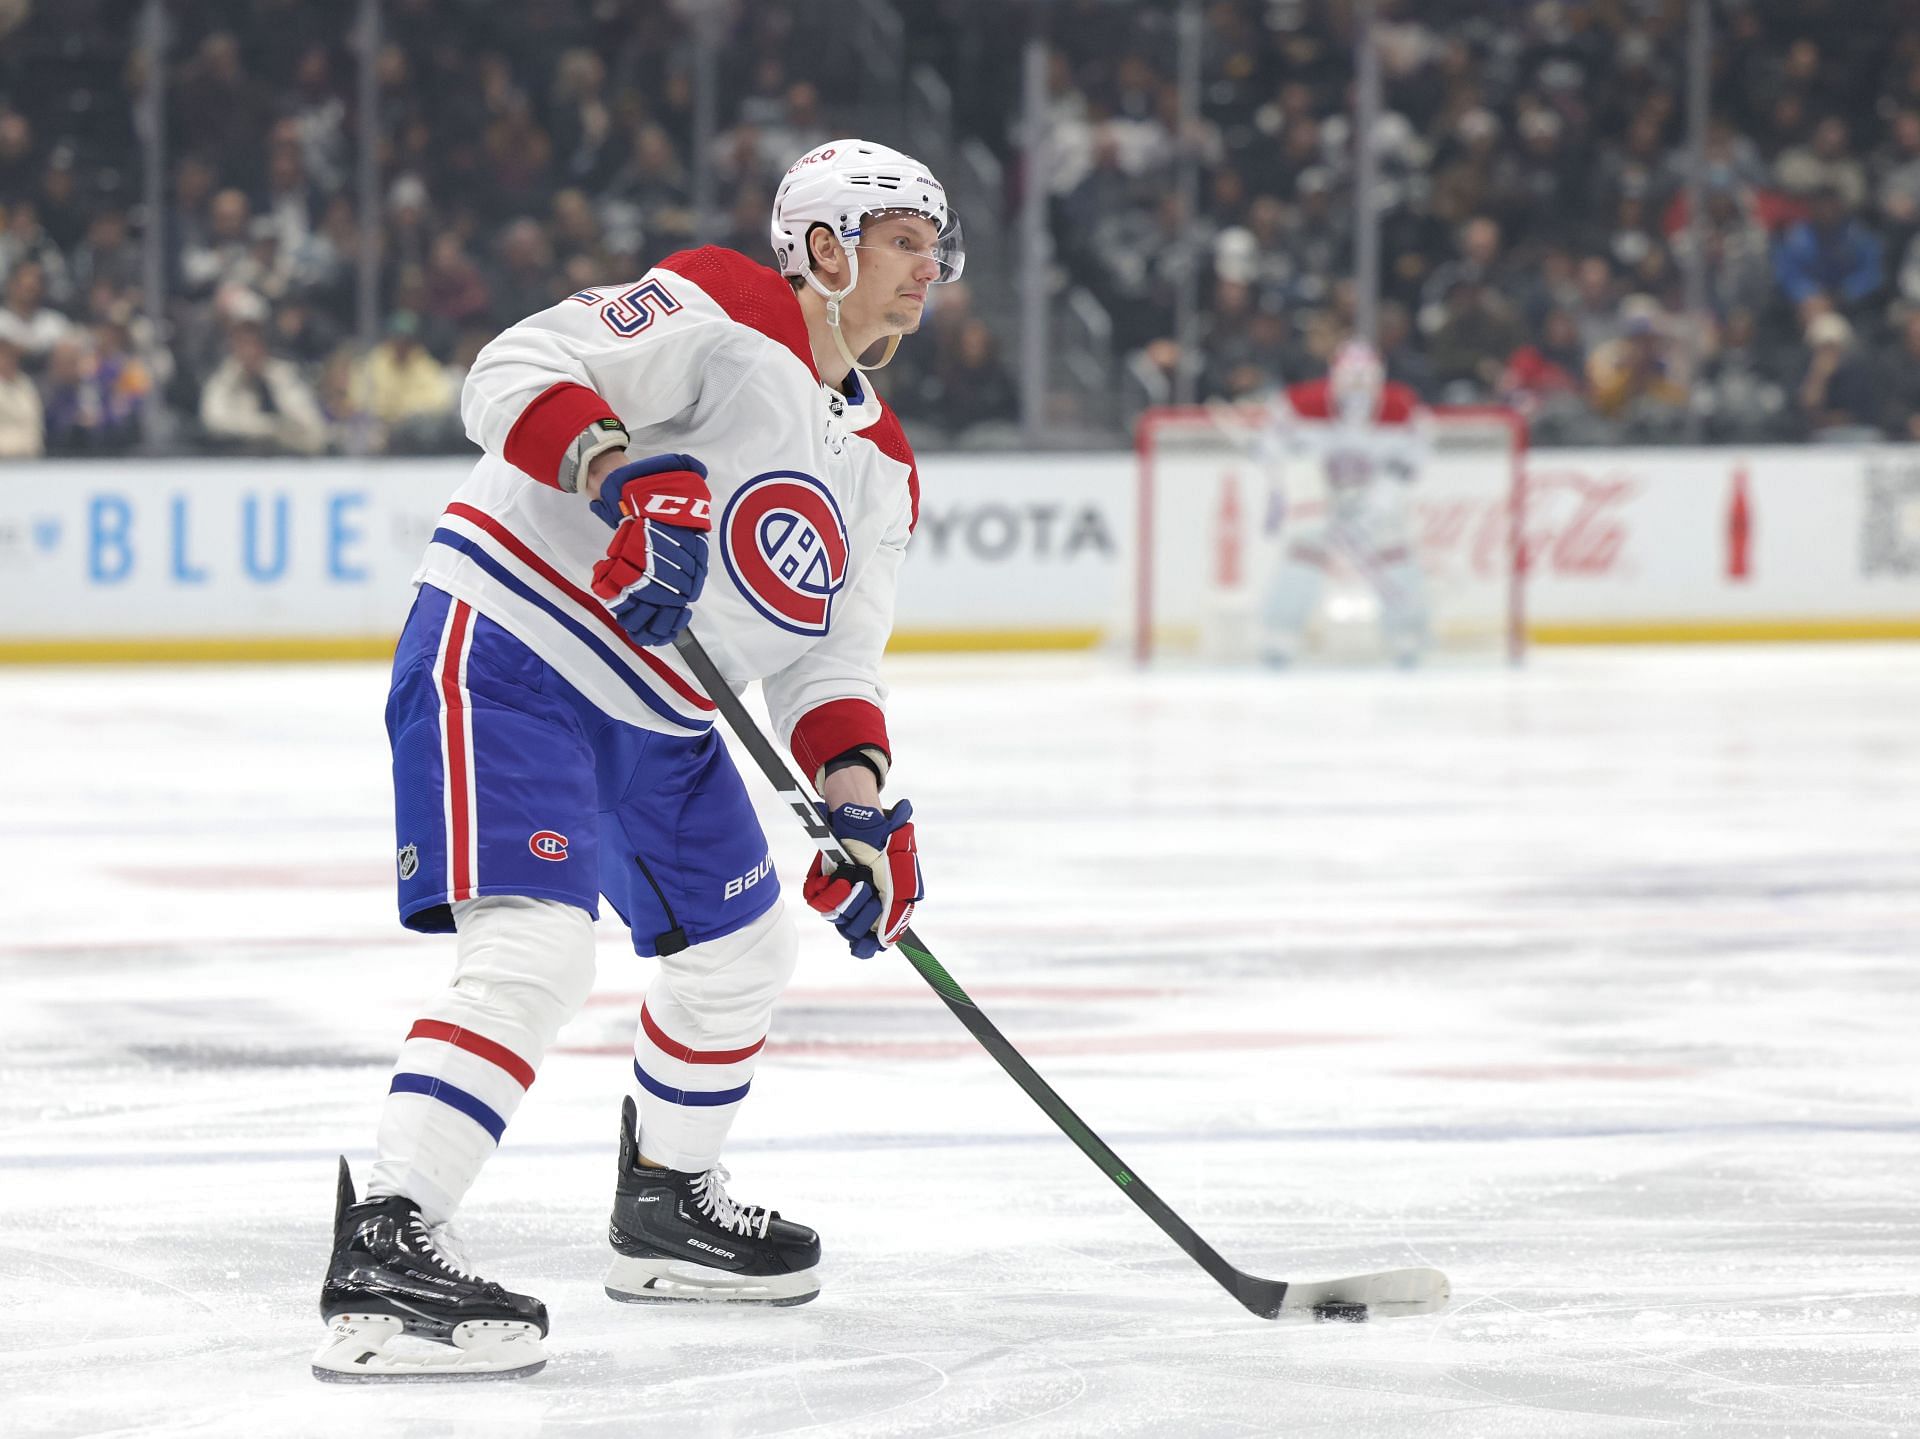 Canadiens' Denis Gurianov won't wear Pride jersey, will sit out